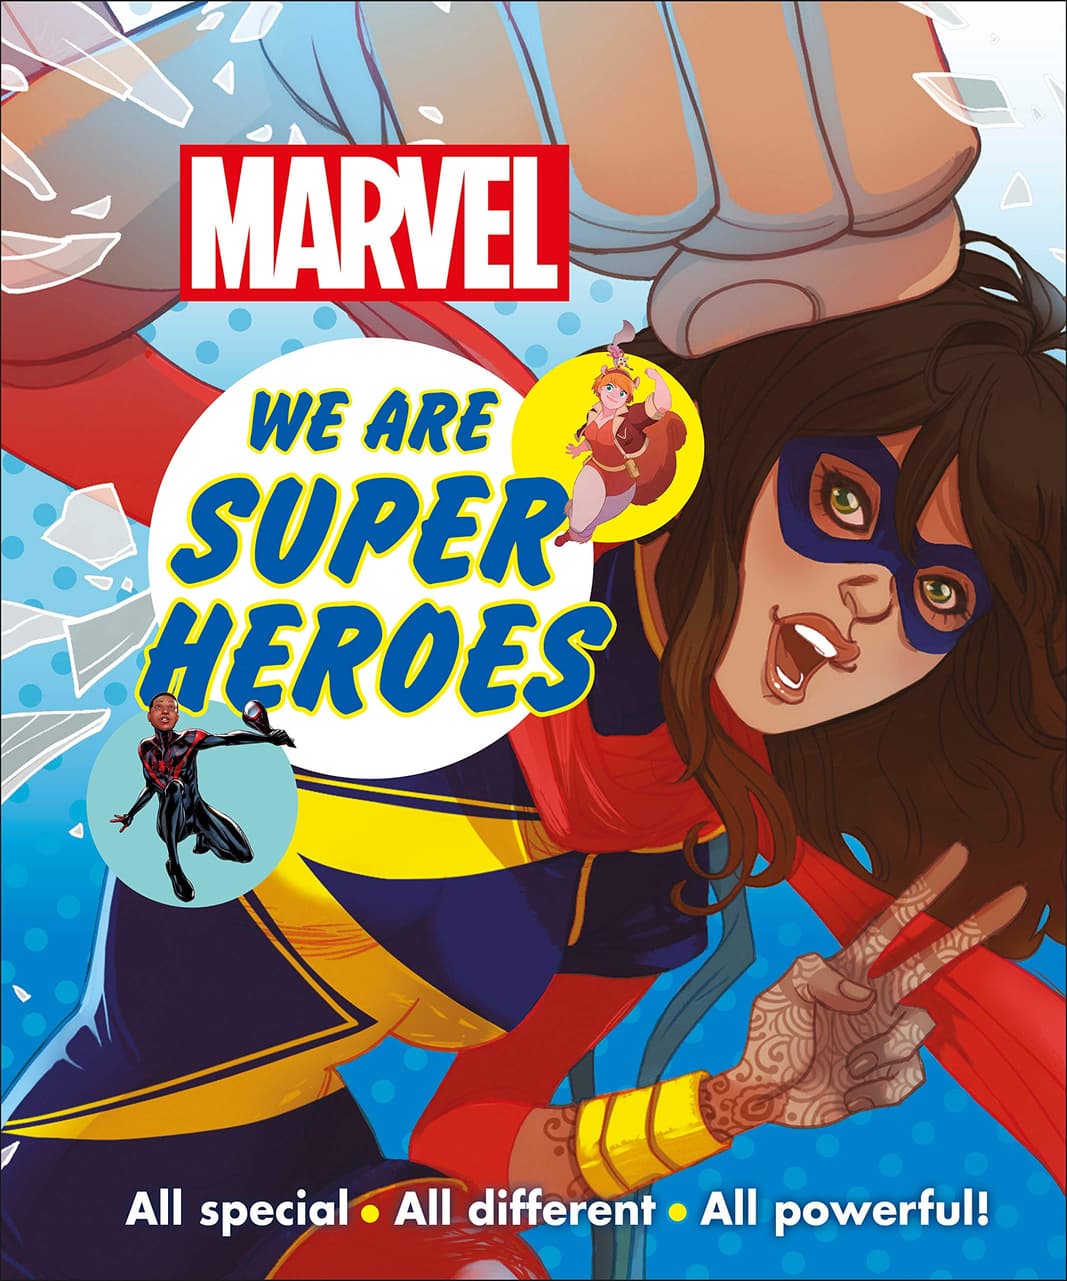 MARVEL WE ARE SUPER HEROES: ALL SPECIAL, ALL DIFFERENT, ALL POWERFUL!